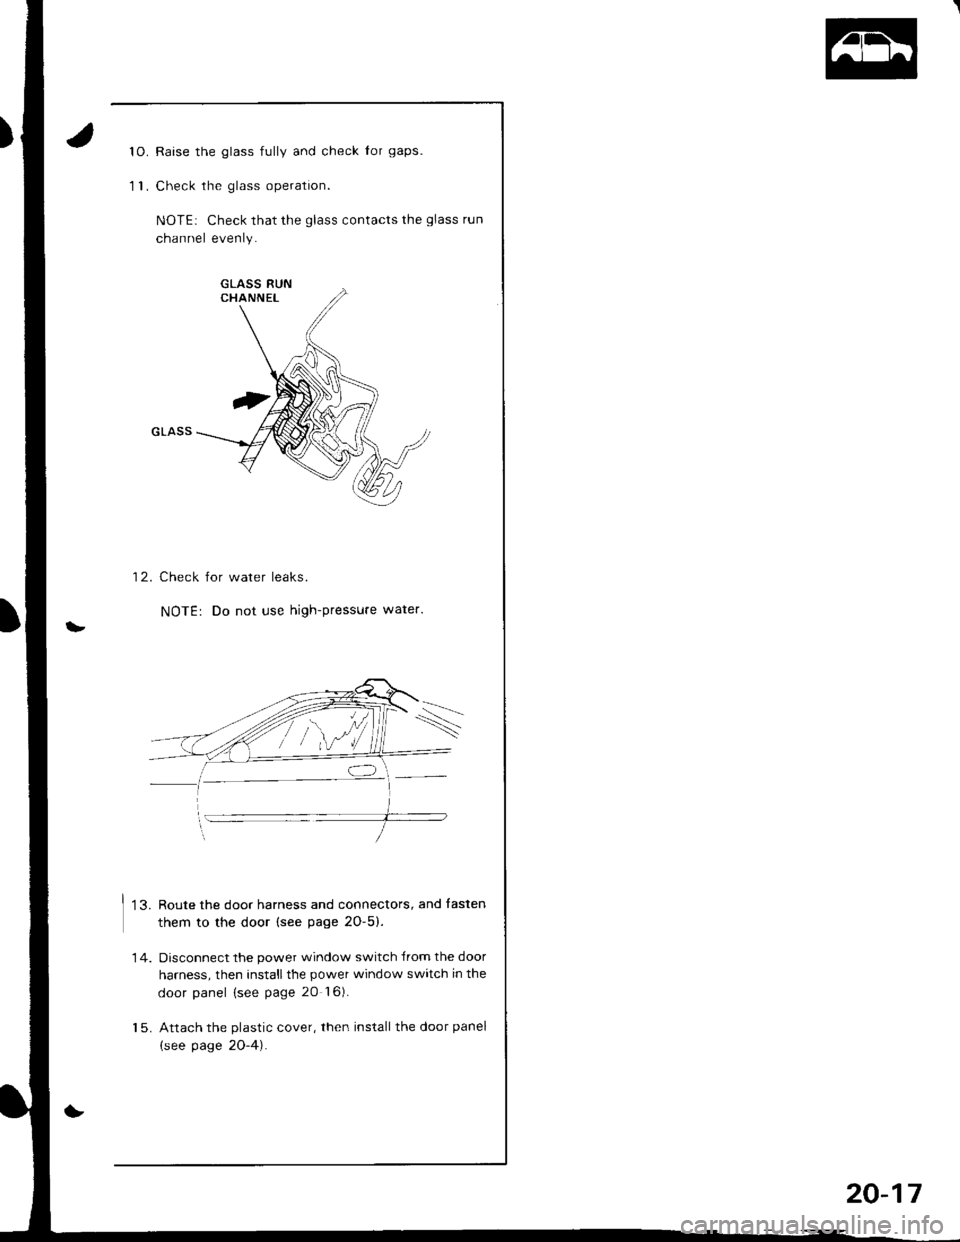 ACURA INTEGRA 1998  Service Repair Manual to.
11.
Raise the glass fully and check Ior gaps.
Check the glass operation.
NOTEi Check that the glass contacts the glass run
channel evenly.
12. Check for water leaks.
NOTE: Do not use high-pressur